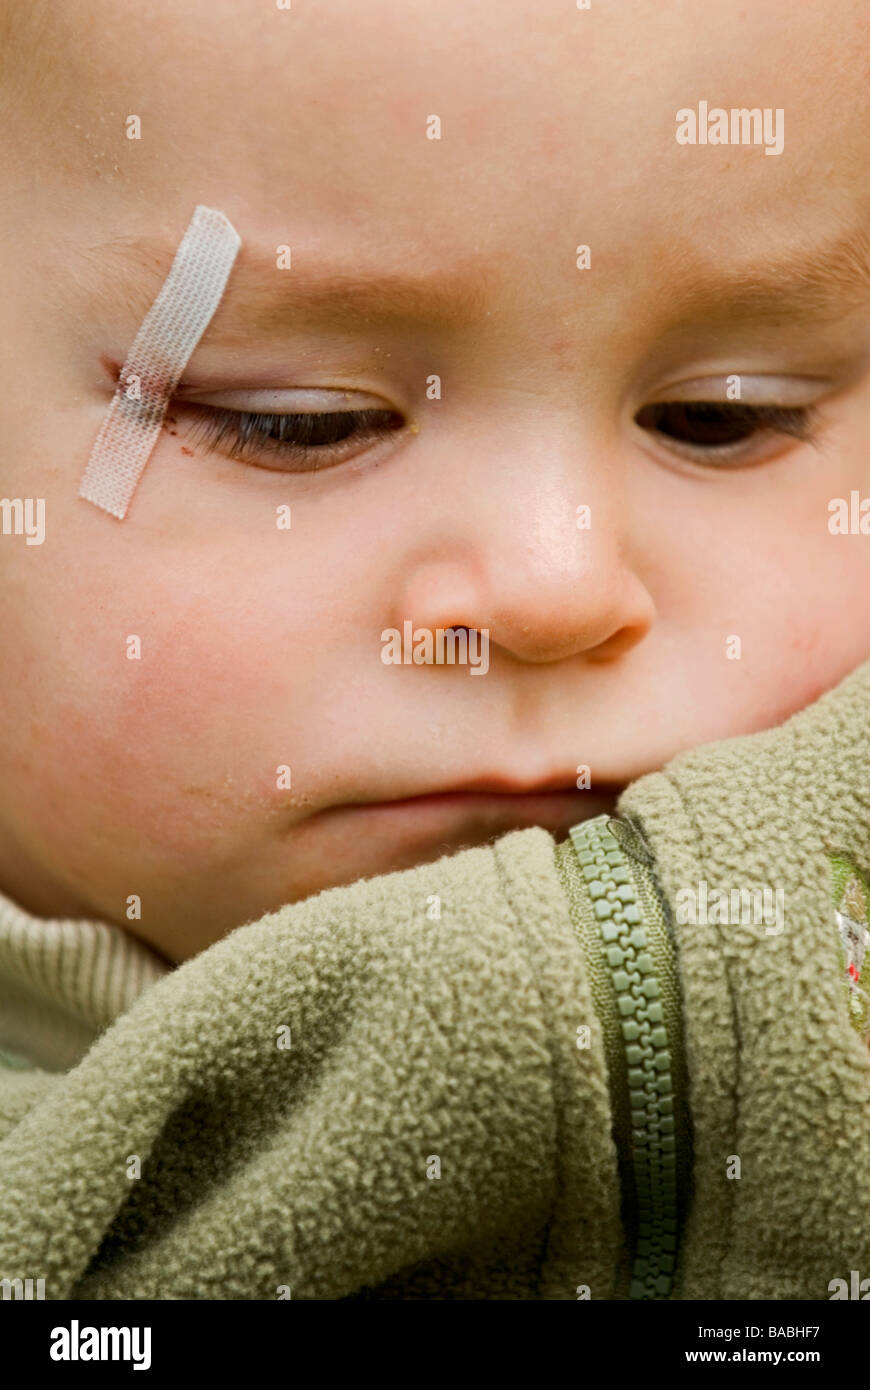 A little boy with a wounded eye Sweden Stock Photo